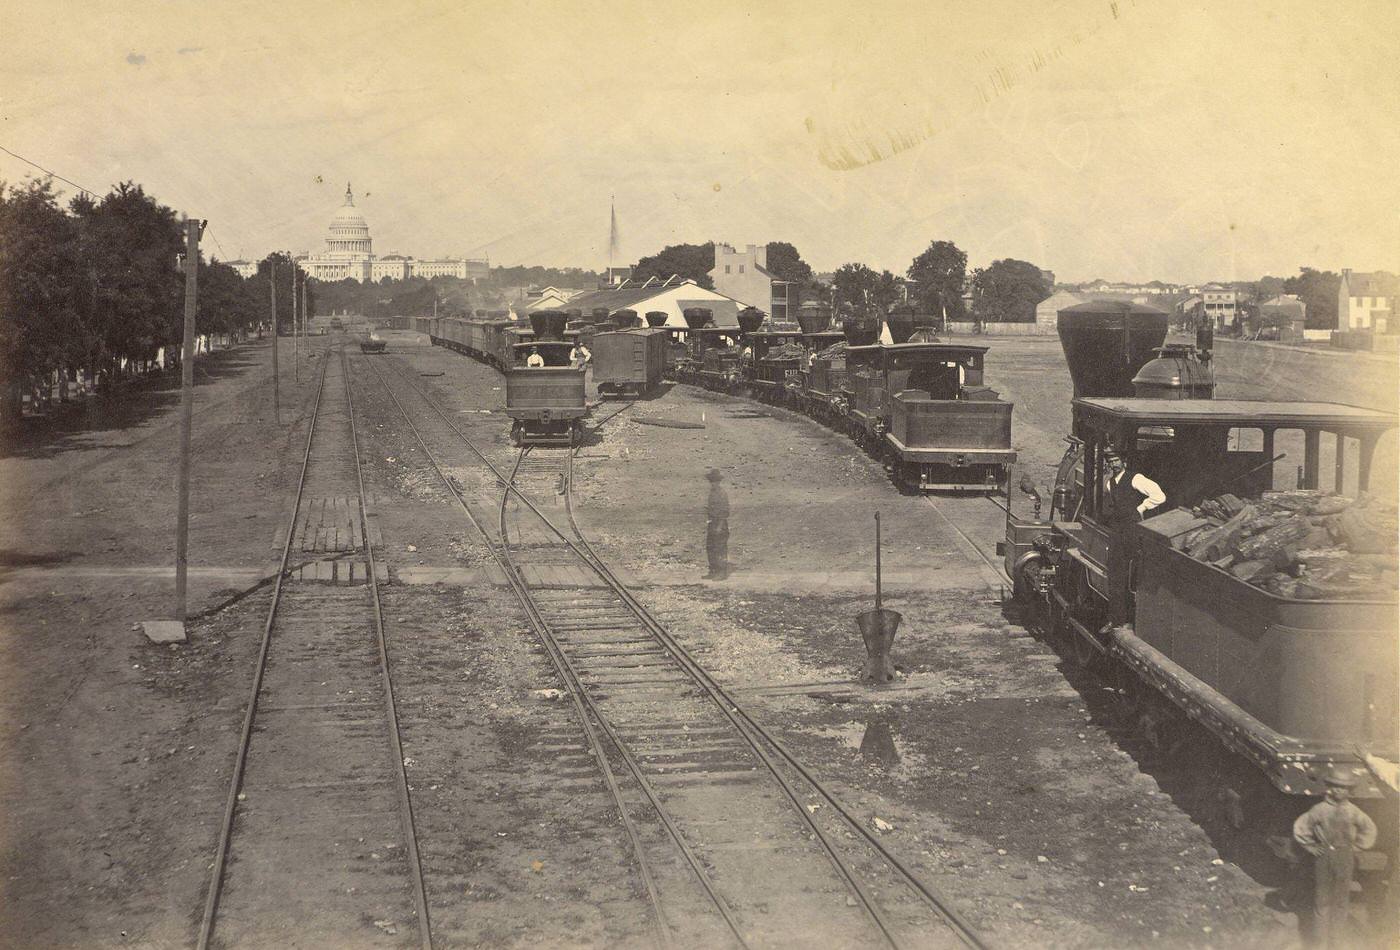 No. 189. Maryland Avenue Depot, Washington, D.C., With Engines sent from Alexandria for safety, 1863